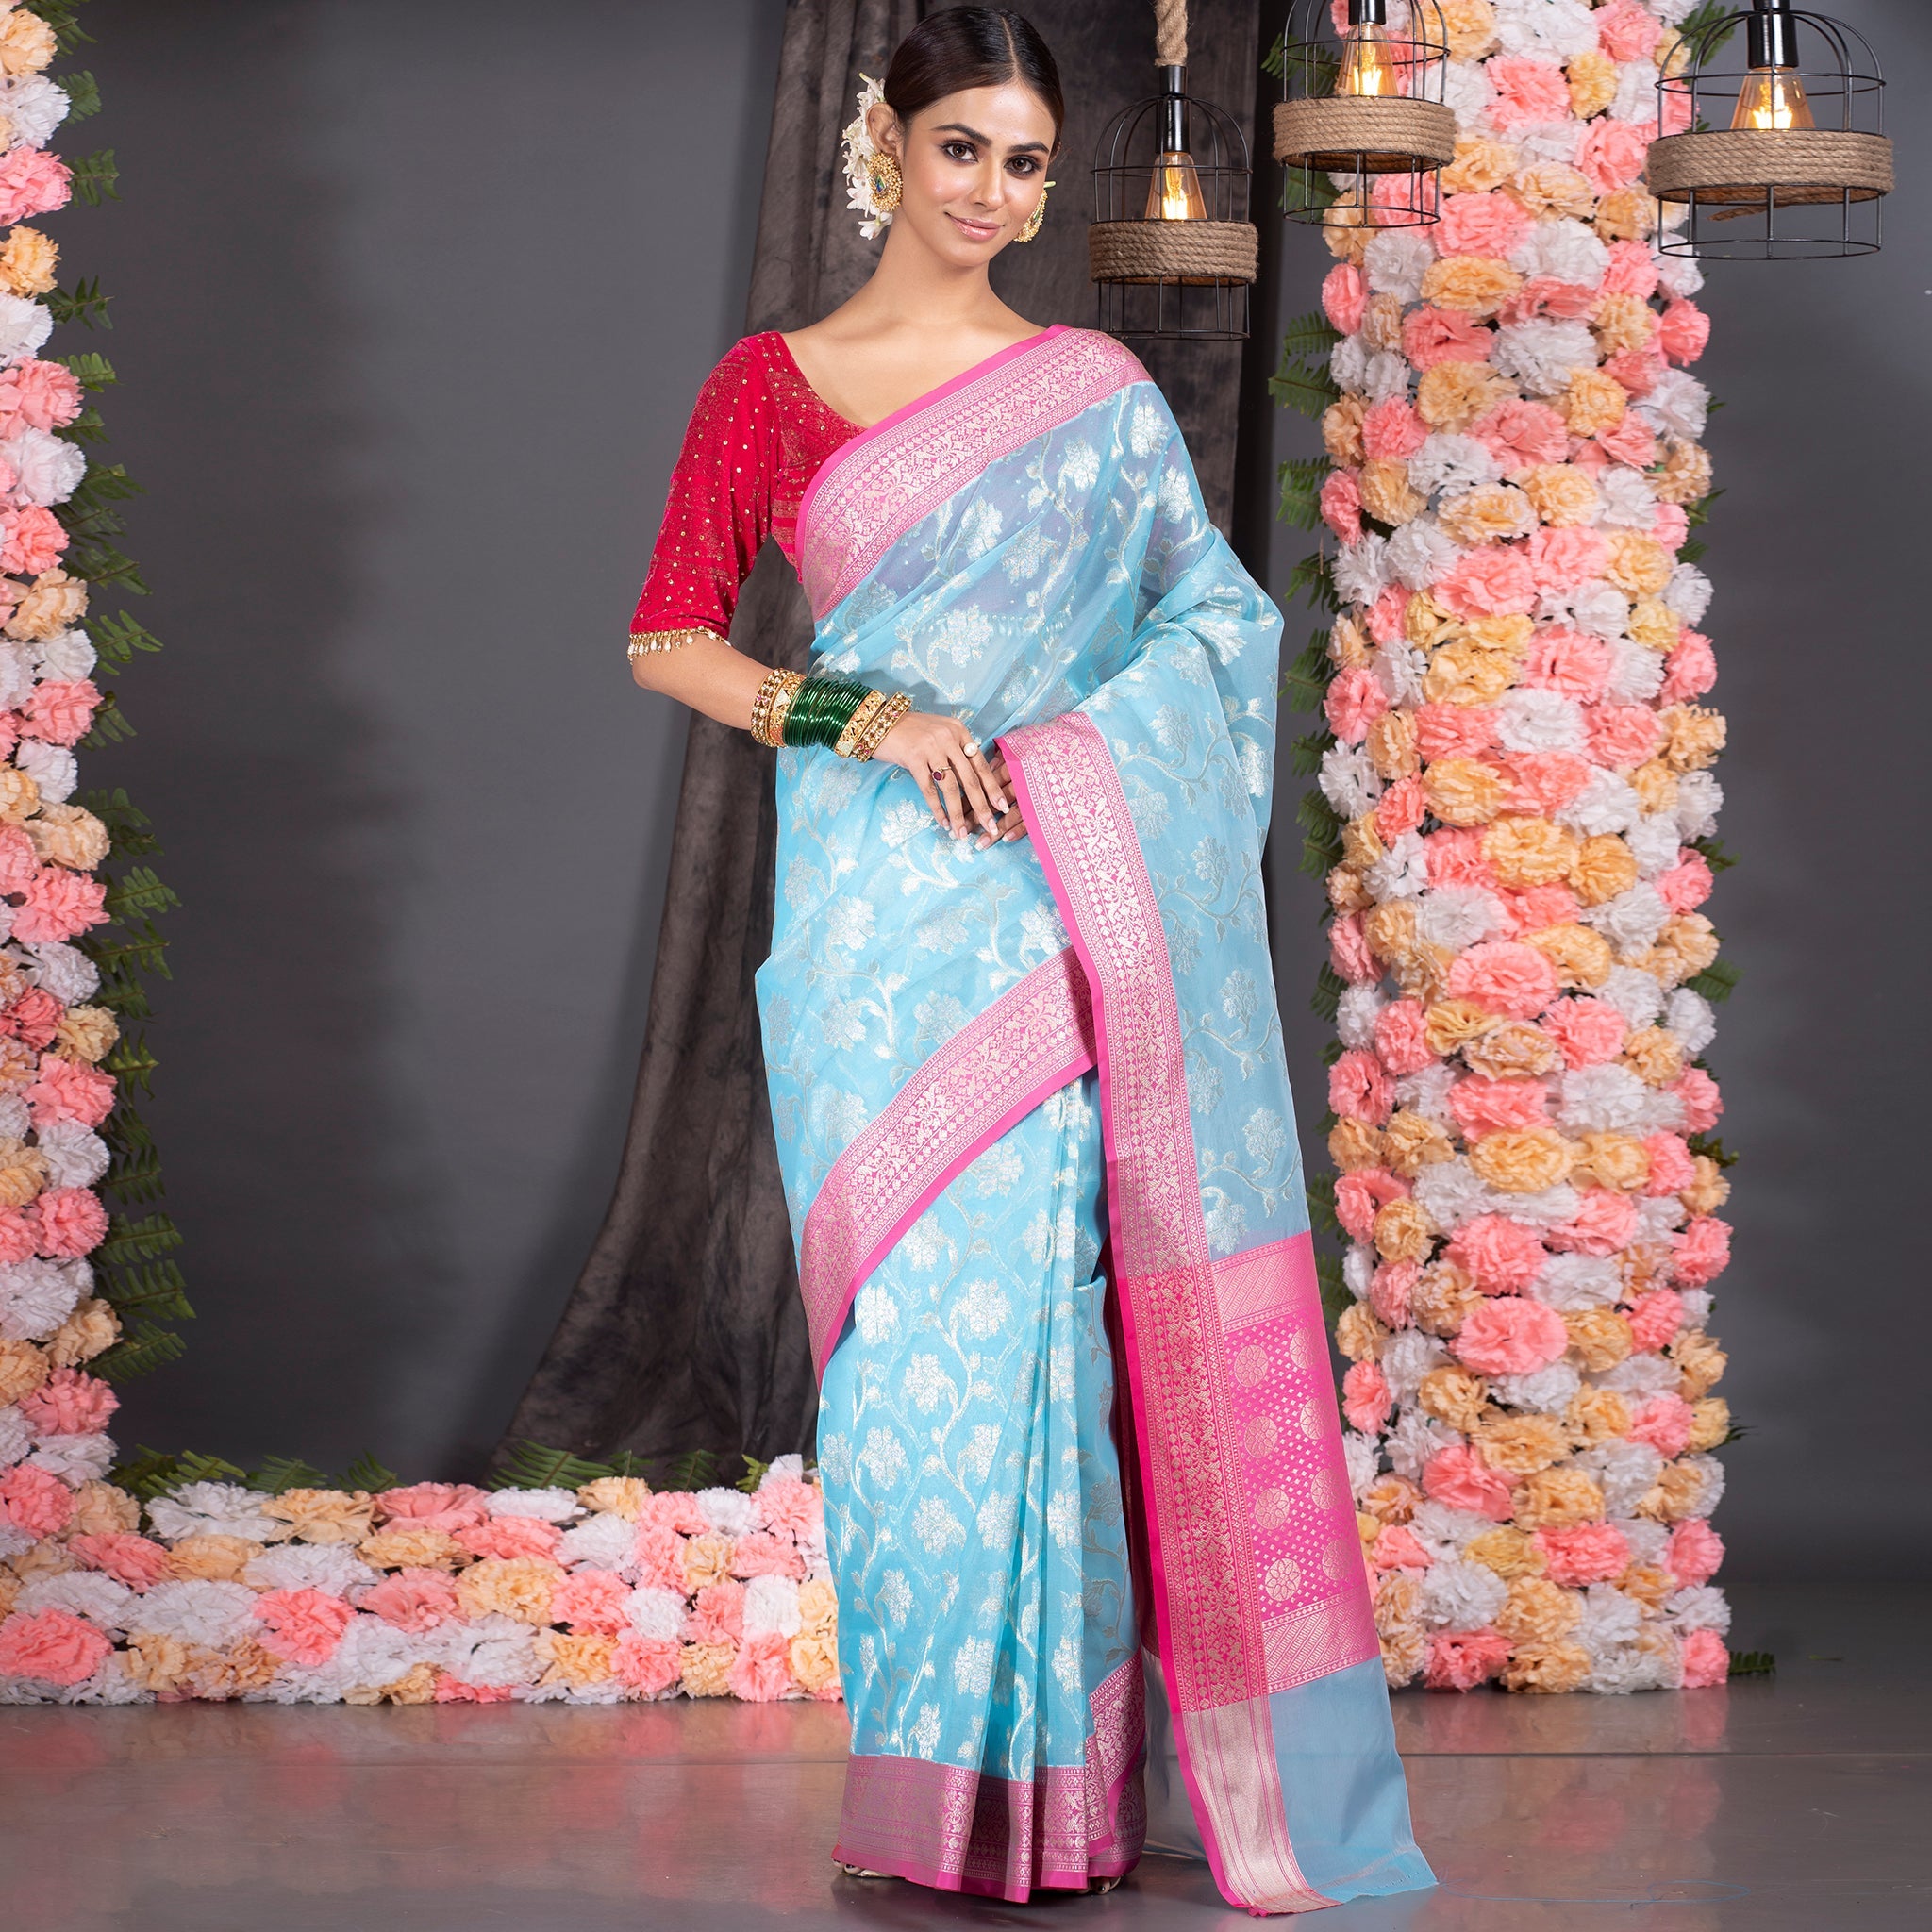 Women's Maya Blue With Floral Zari Jaal Body And Contrasting Border Pallu - Boveee